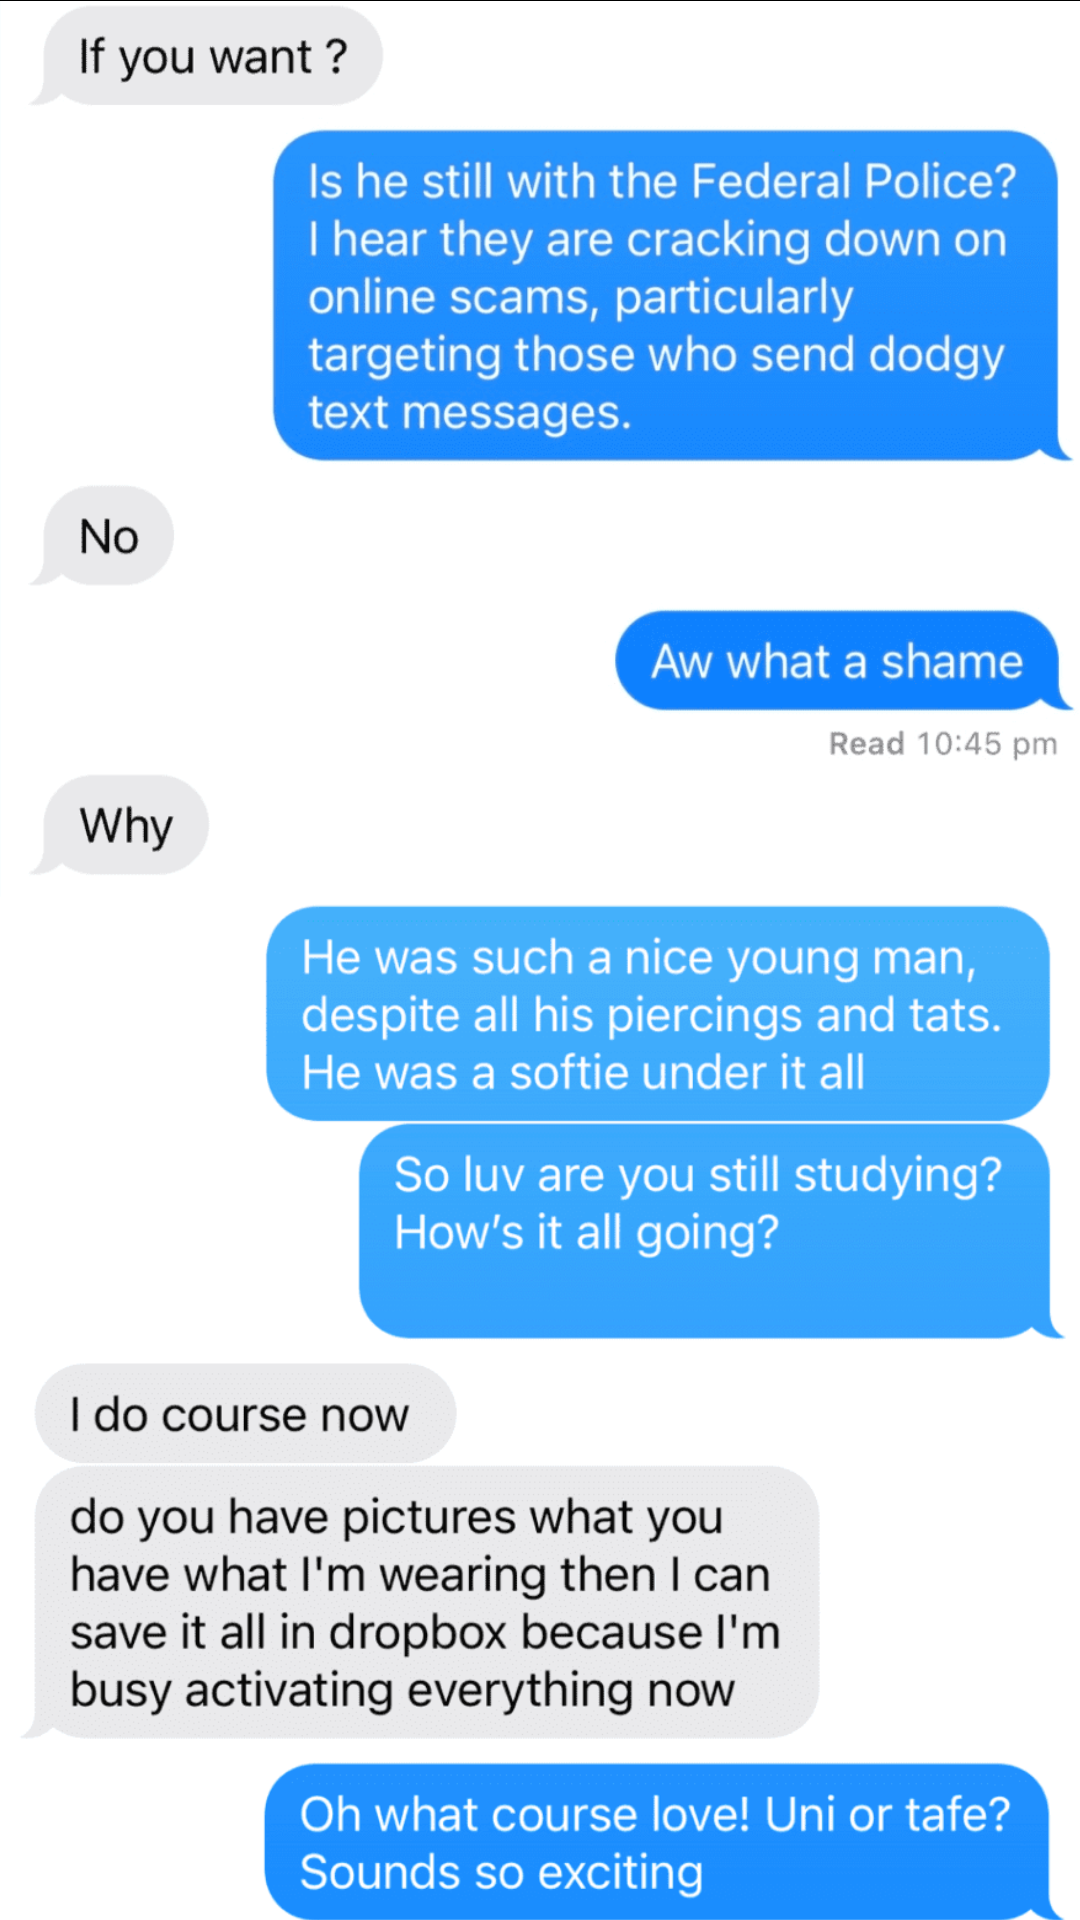 A screenshot of a message exchange between two people, one of which is a scammer